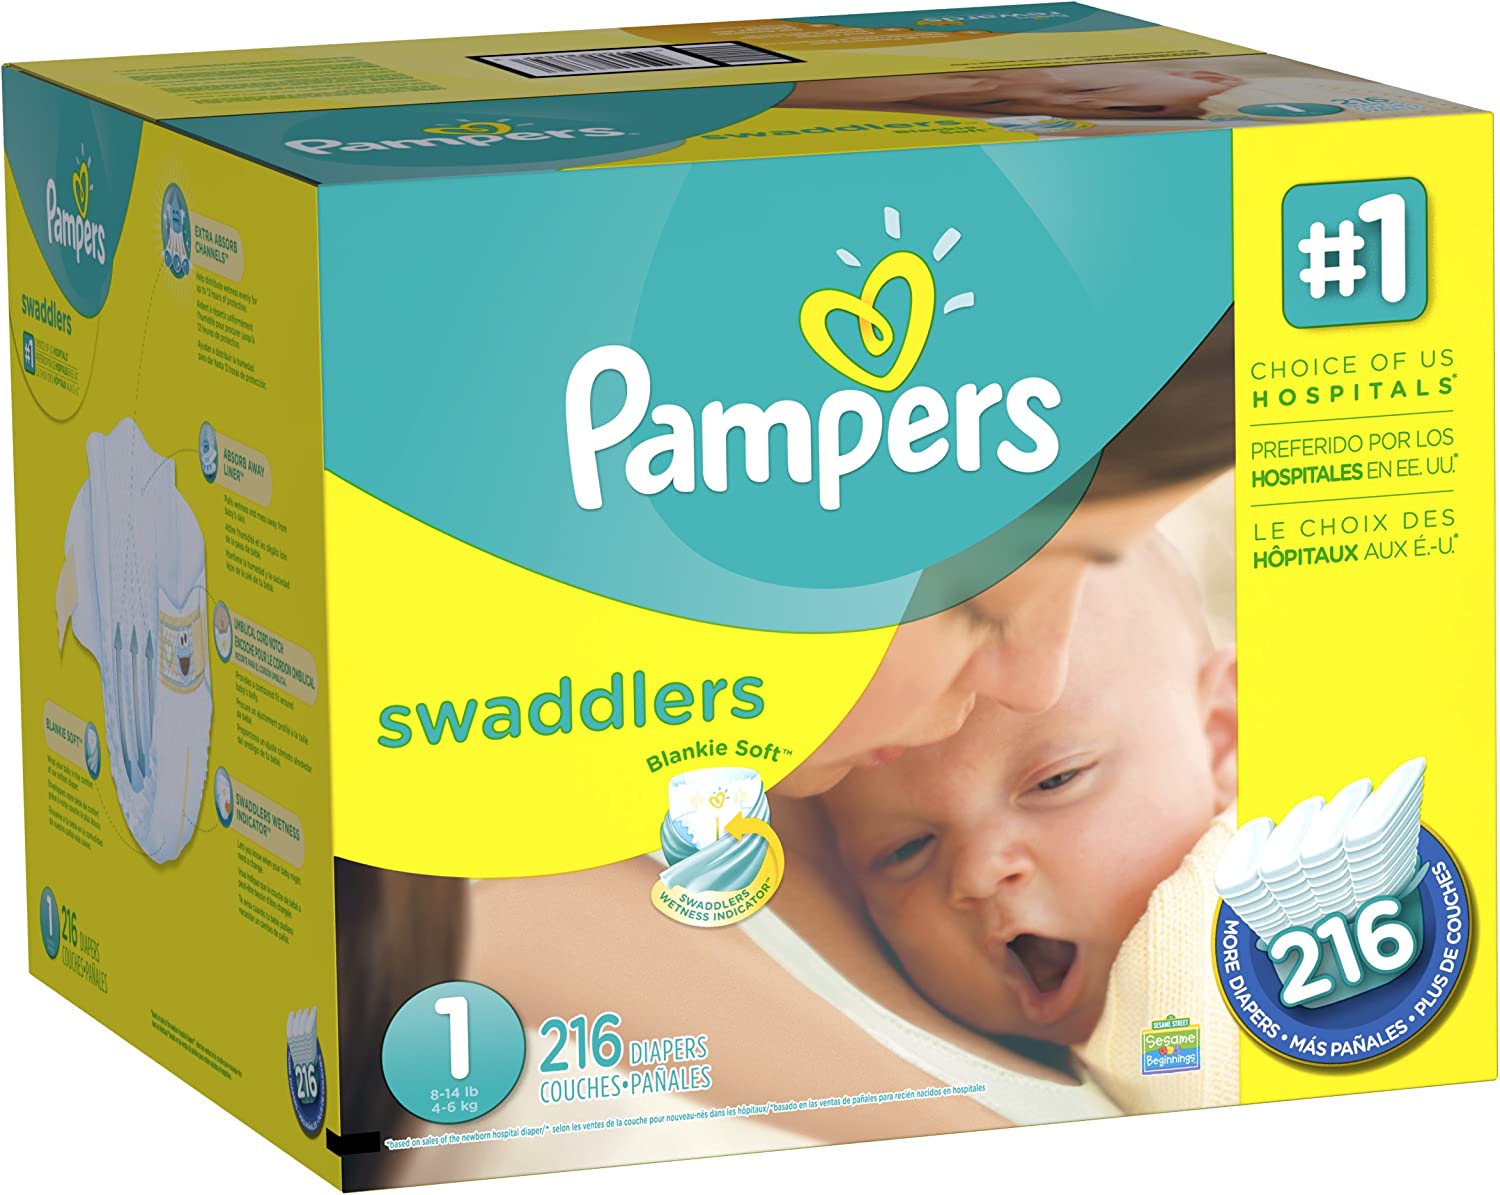 Diapers Newborn / Size 1 (8-14 lb), 216 Count – Pampers Swaddlers Sensitive Disposable Baby Diapers, (old version) (Packaging May Vary)